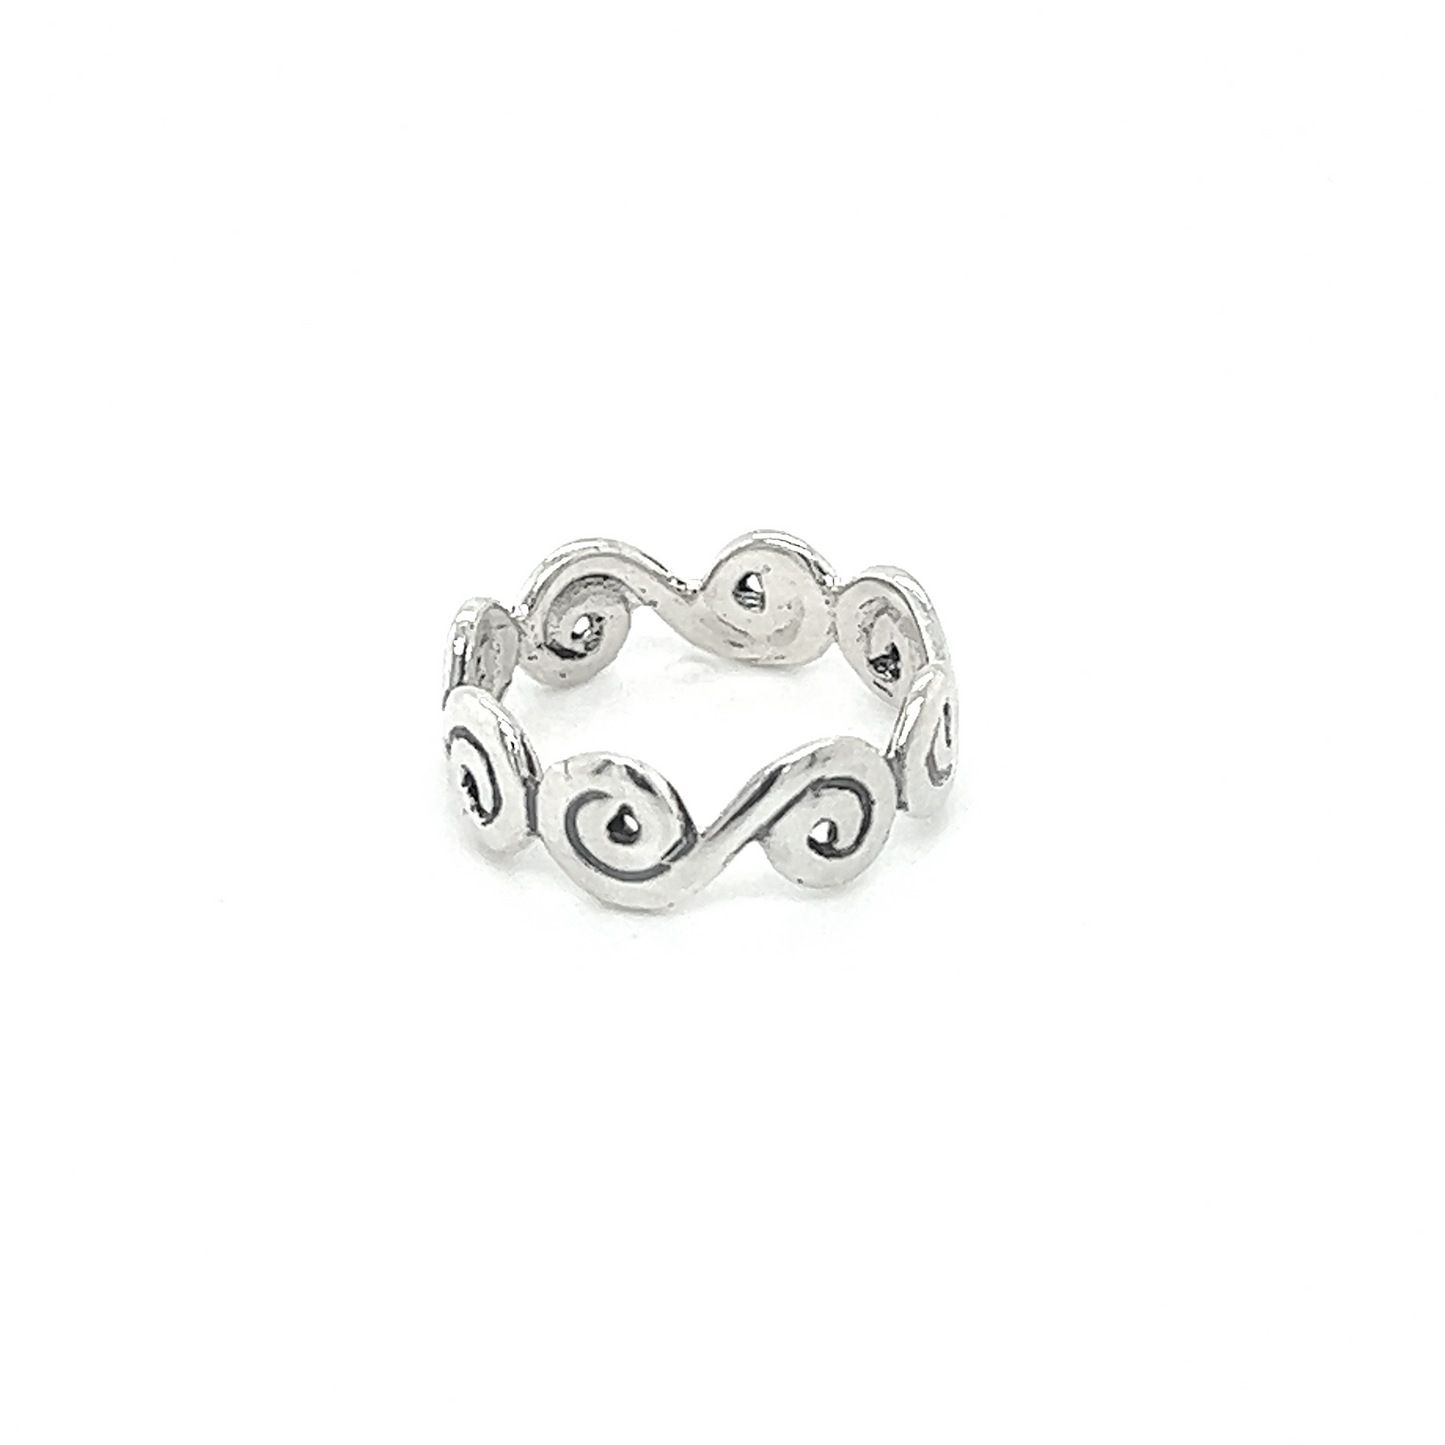 A Wavy Swirl Band ring with abstract swirls on it.